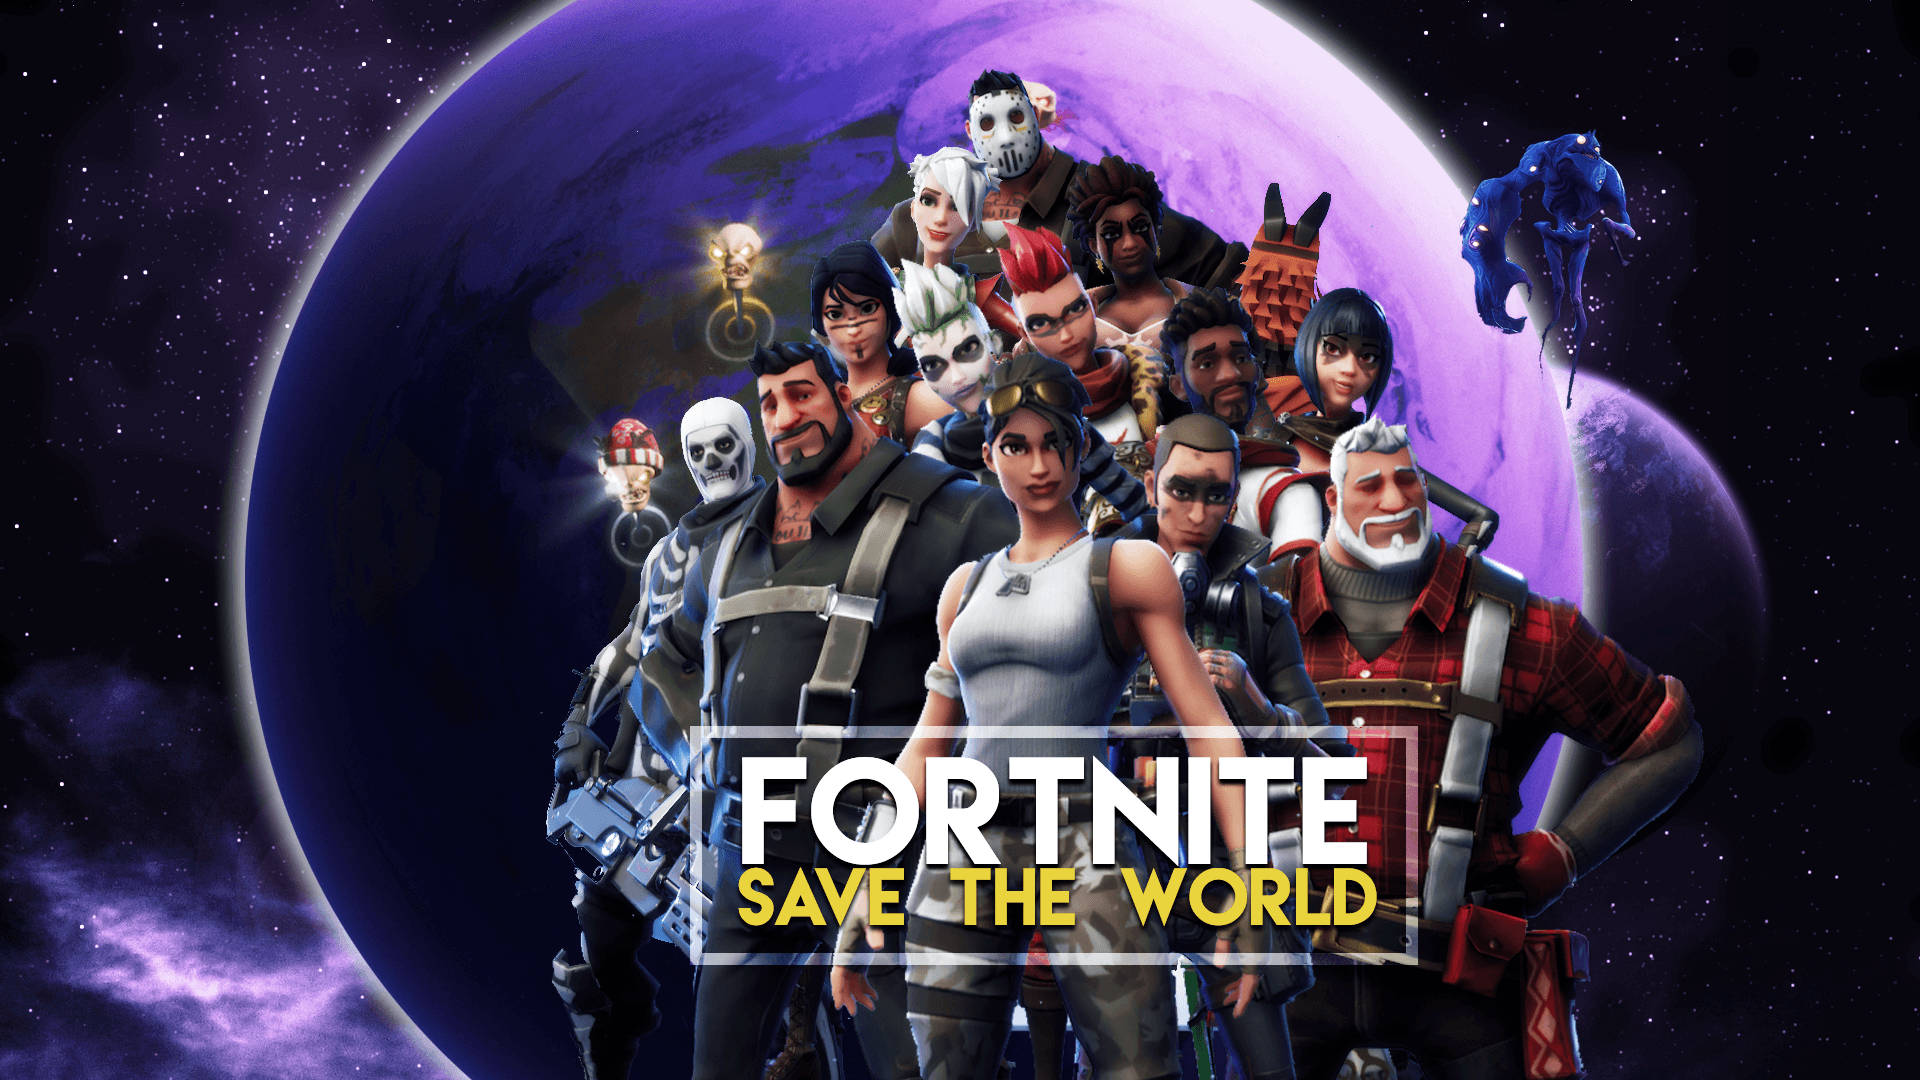 Download Cool Fortnite Character Selection Wallpaper 